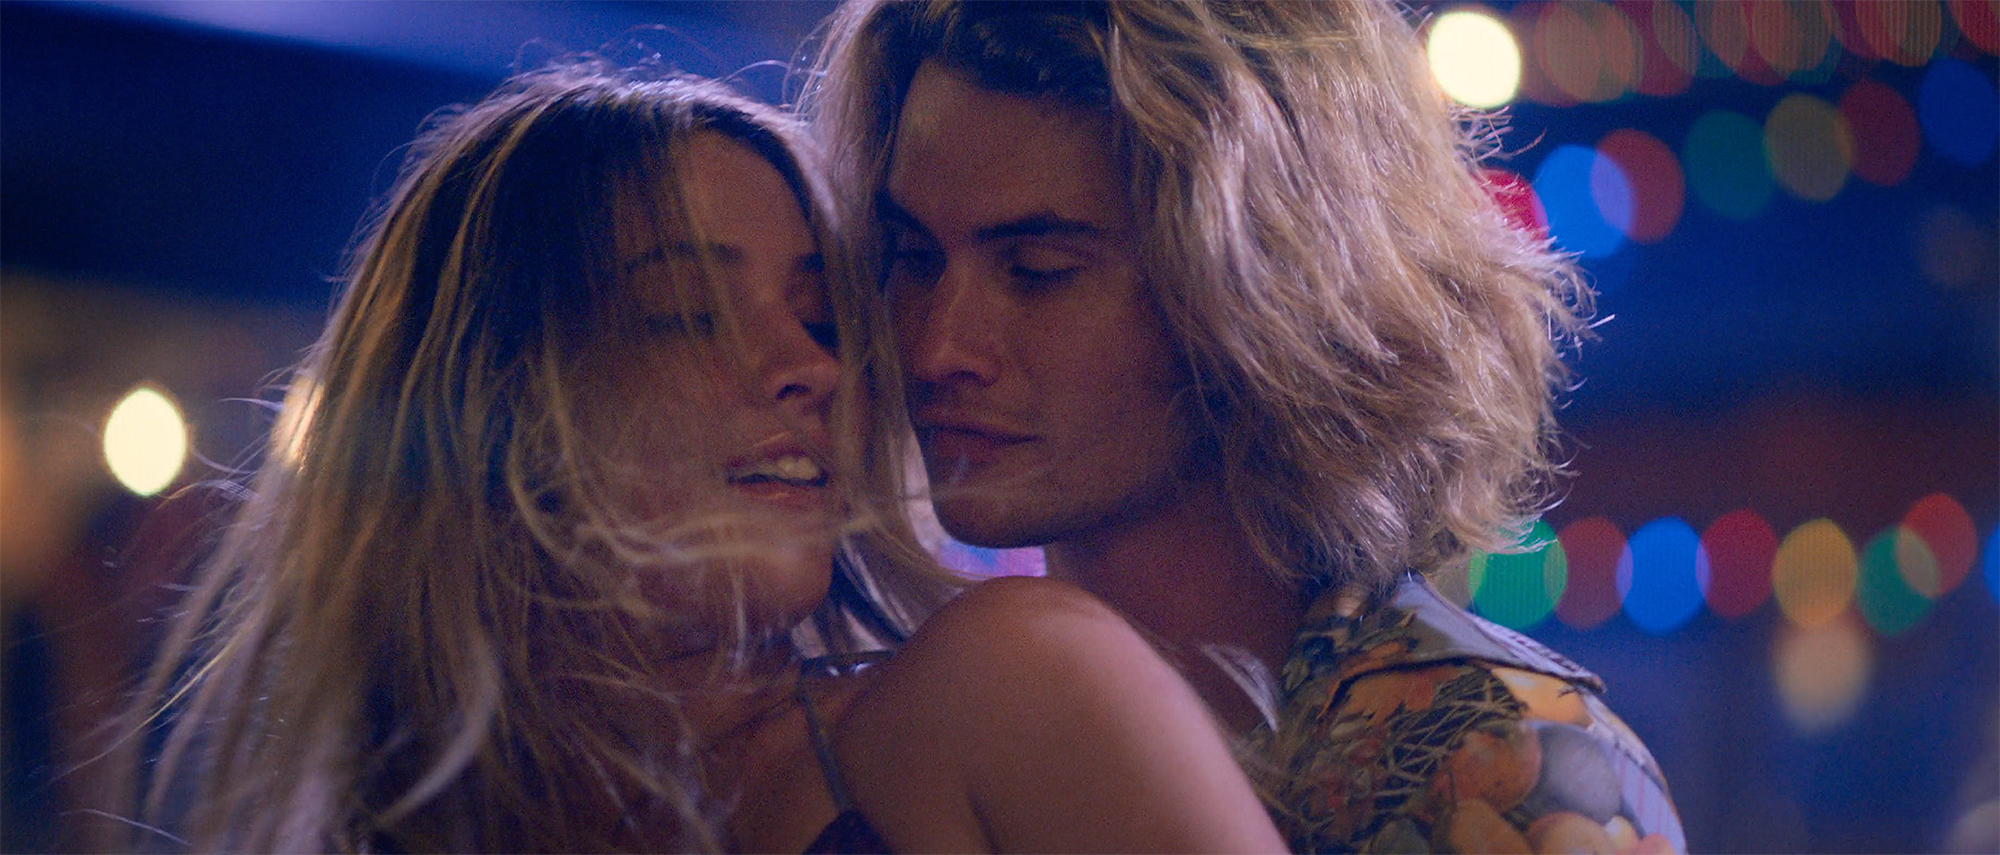 2000px x 855px - Chase Stokes, Madelyn Cline Make Out in Kygo's 'Hot Stuff' Video